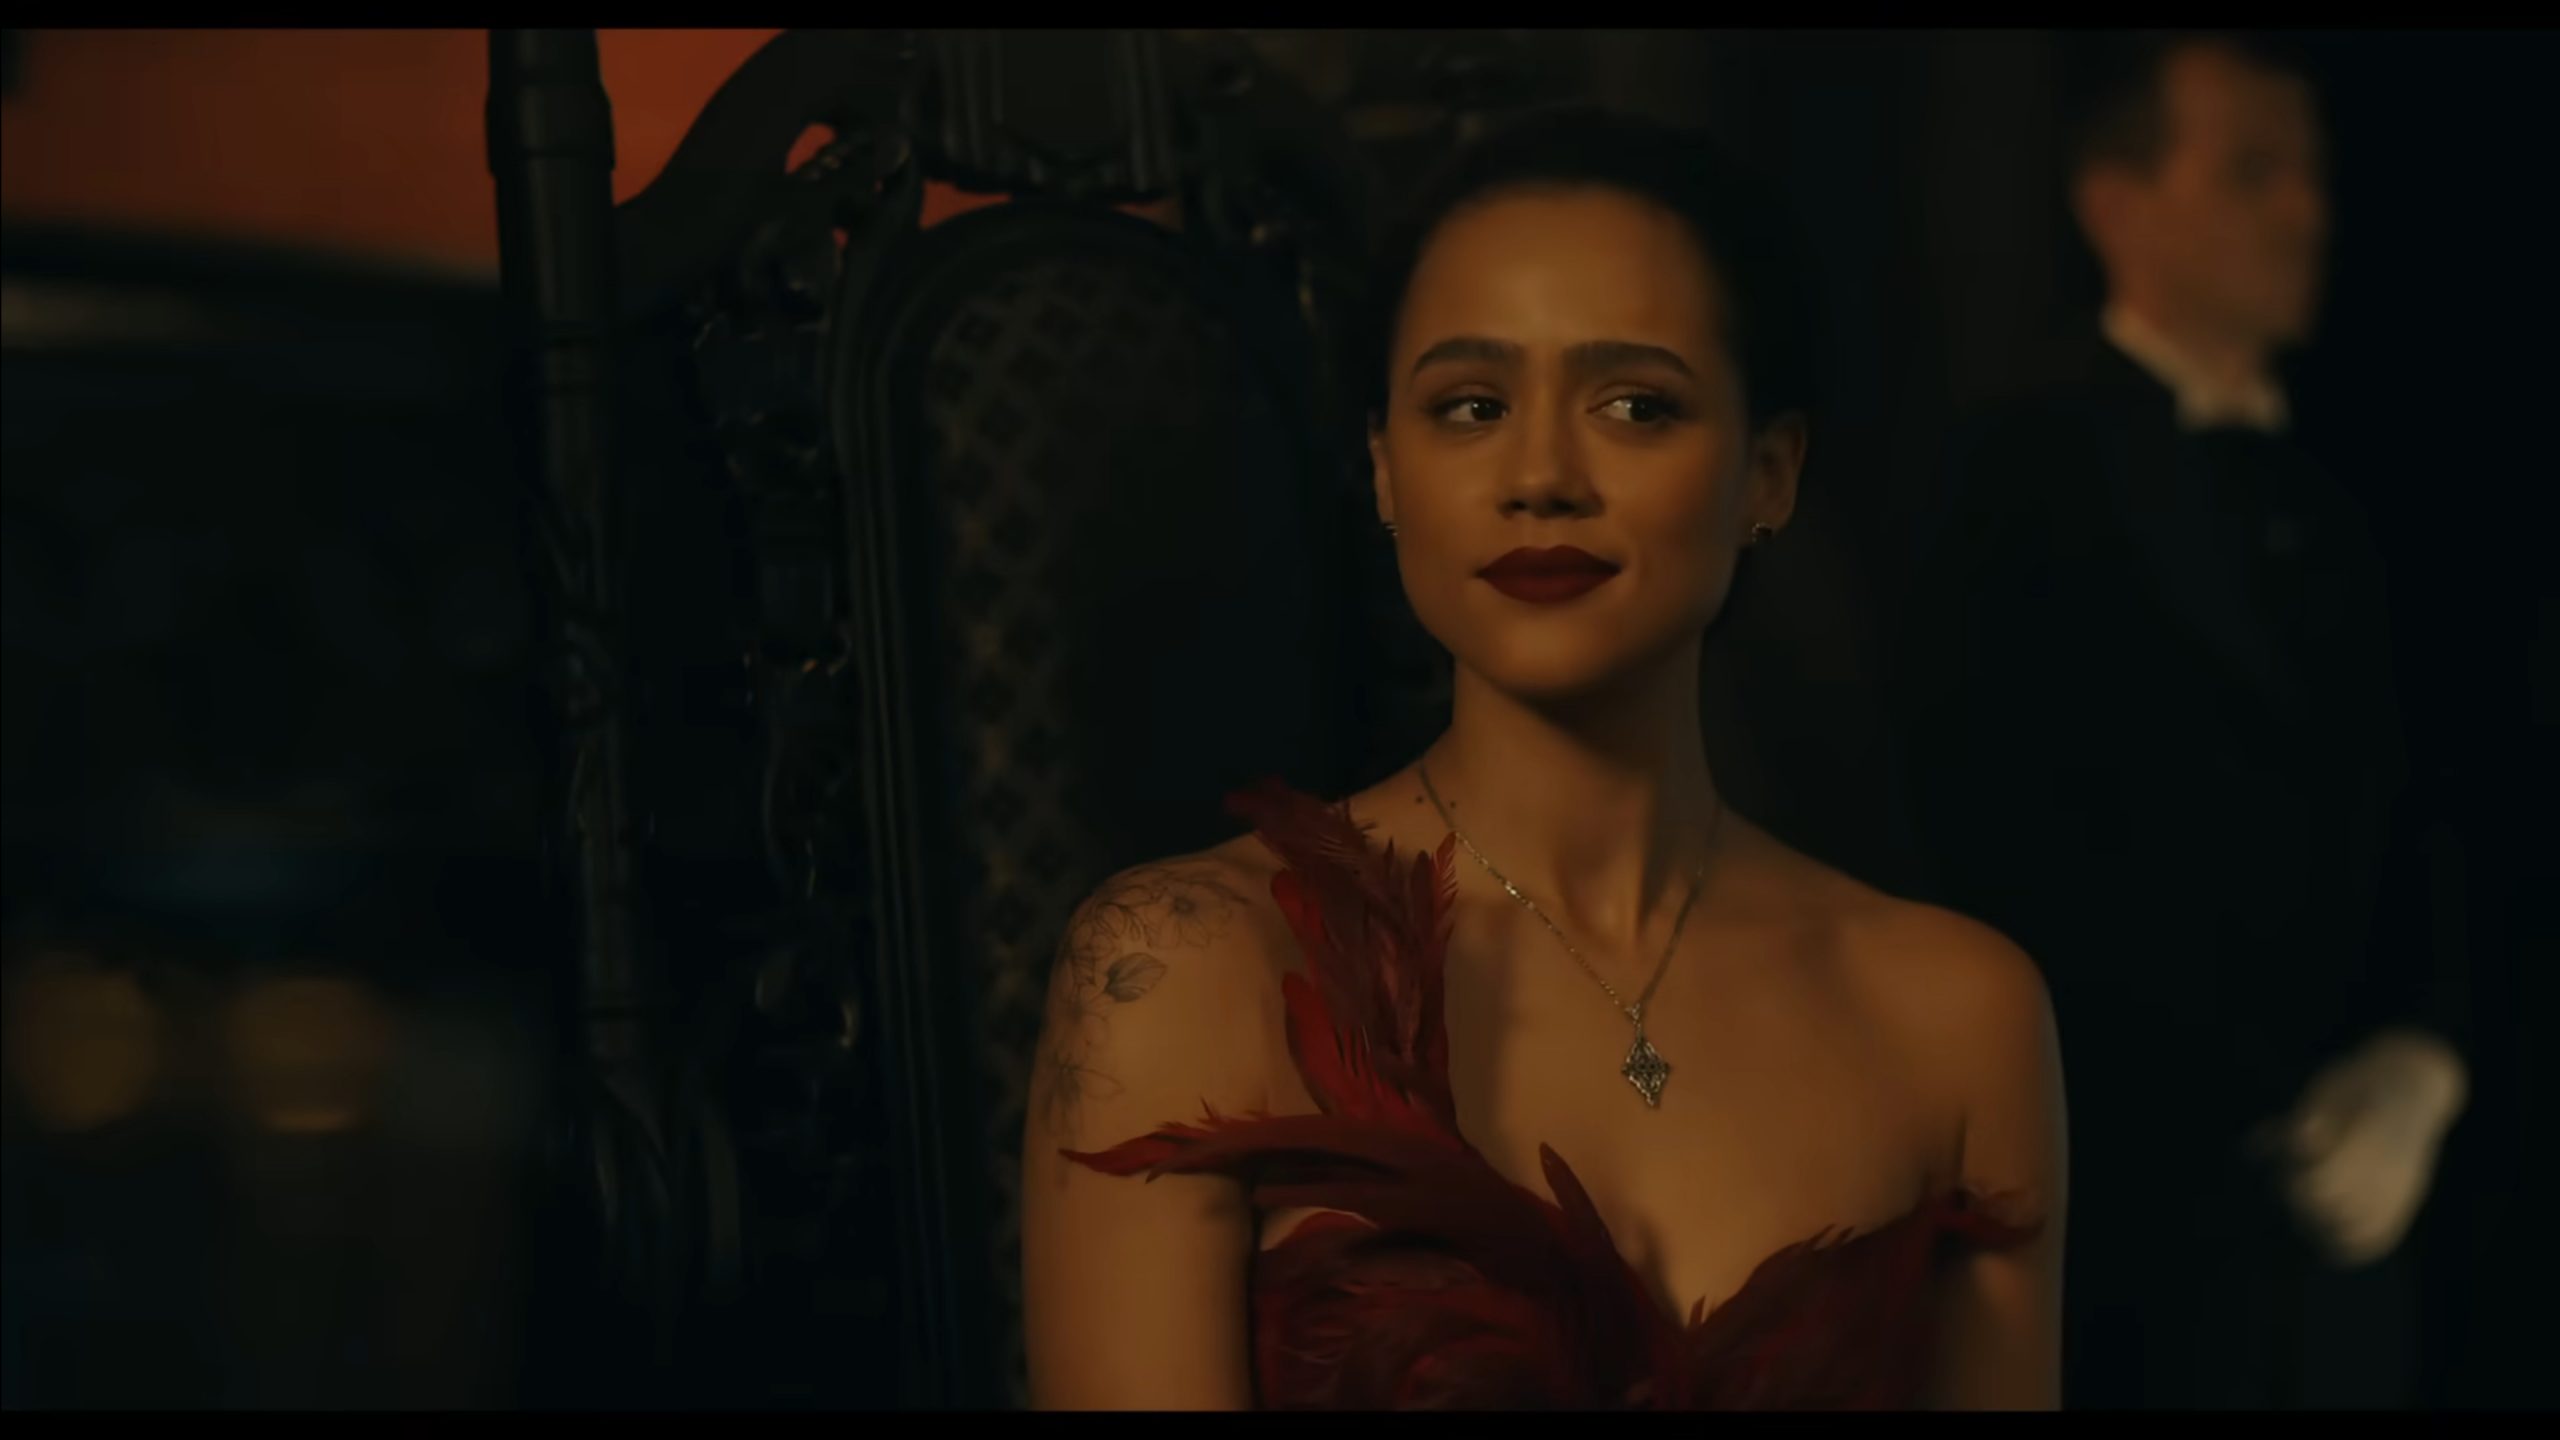 Evie (Nathalie Emmanuel) wearing a dress Walter picked out for her